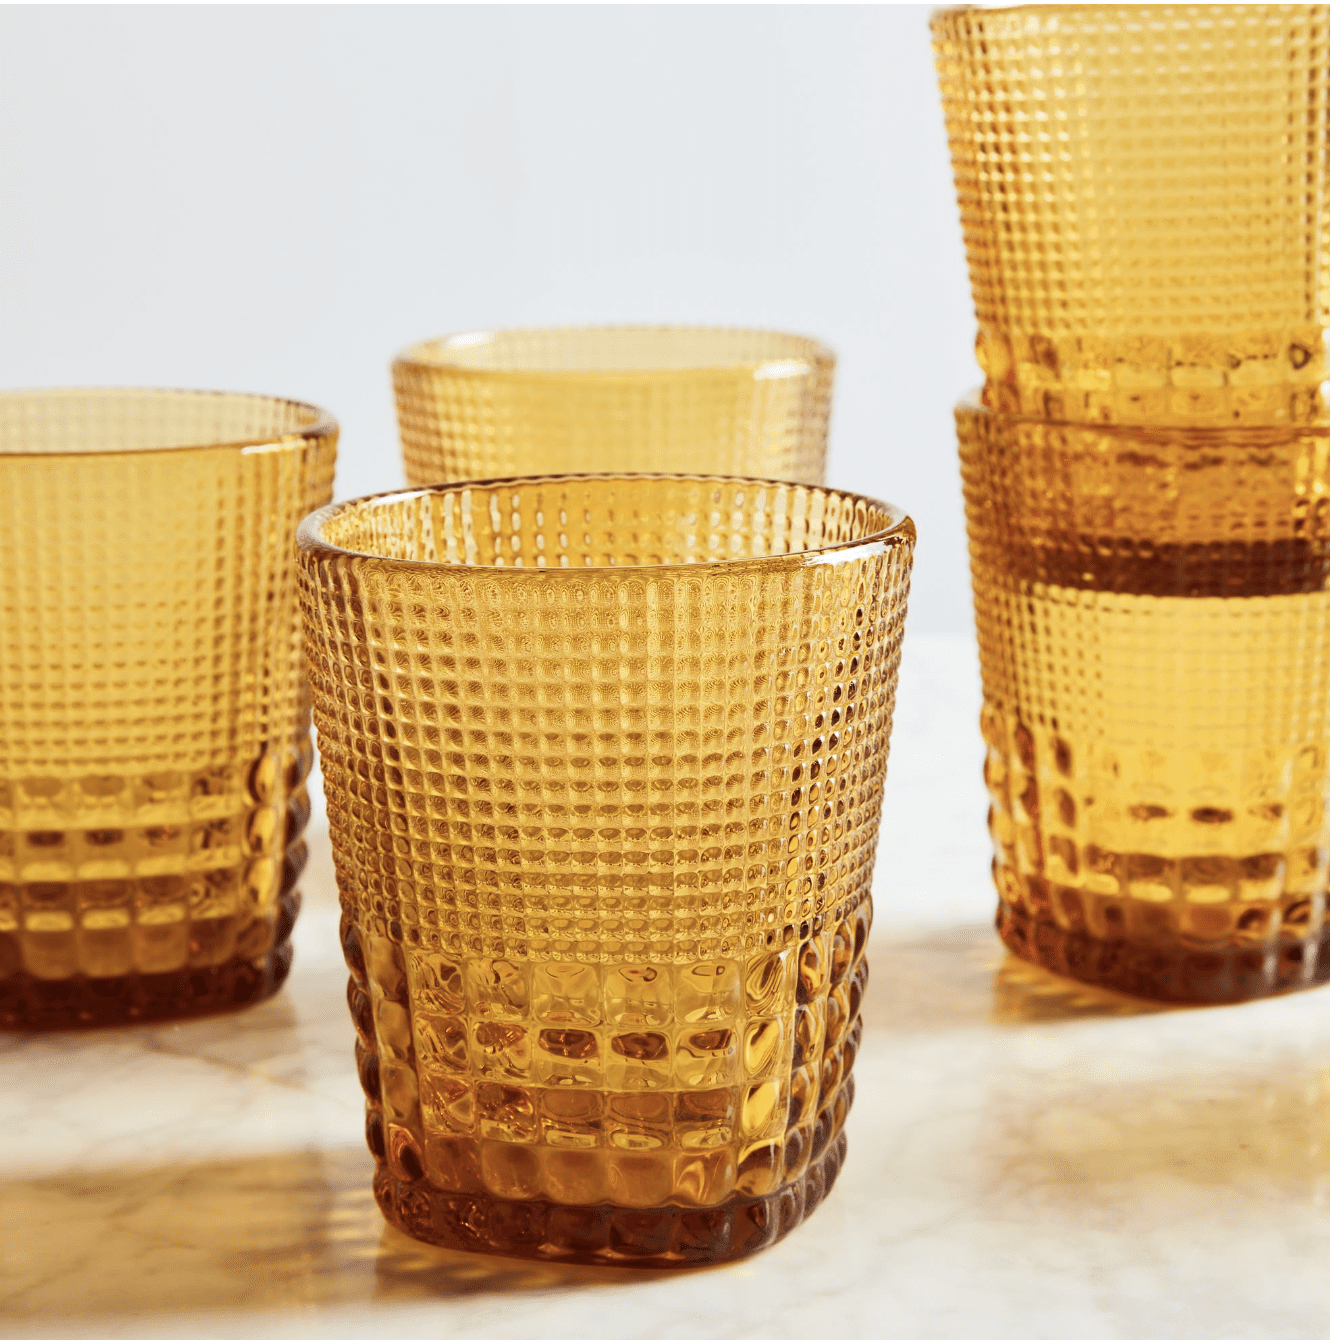 Affordable Drinking Glasses